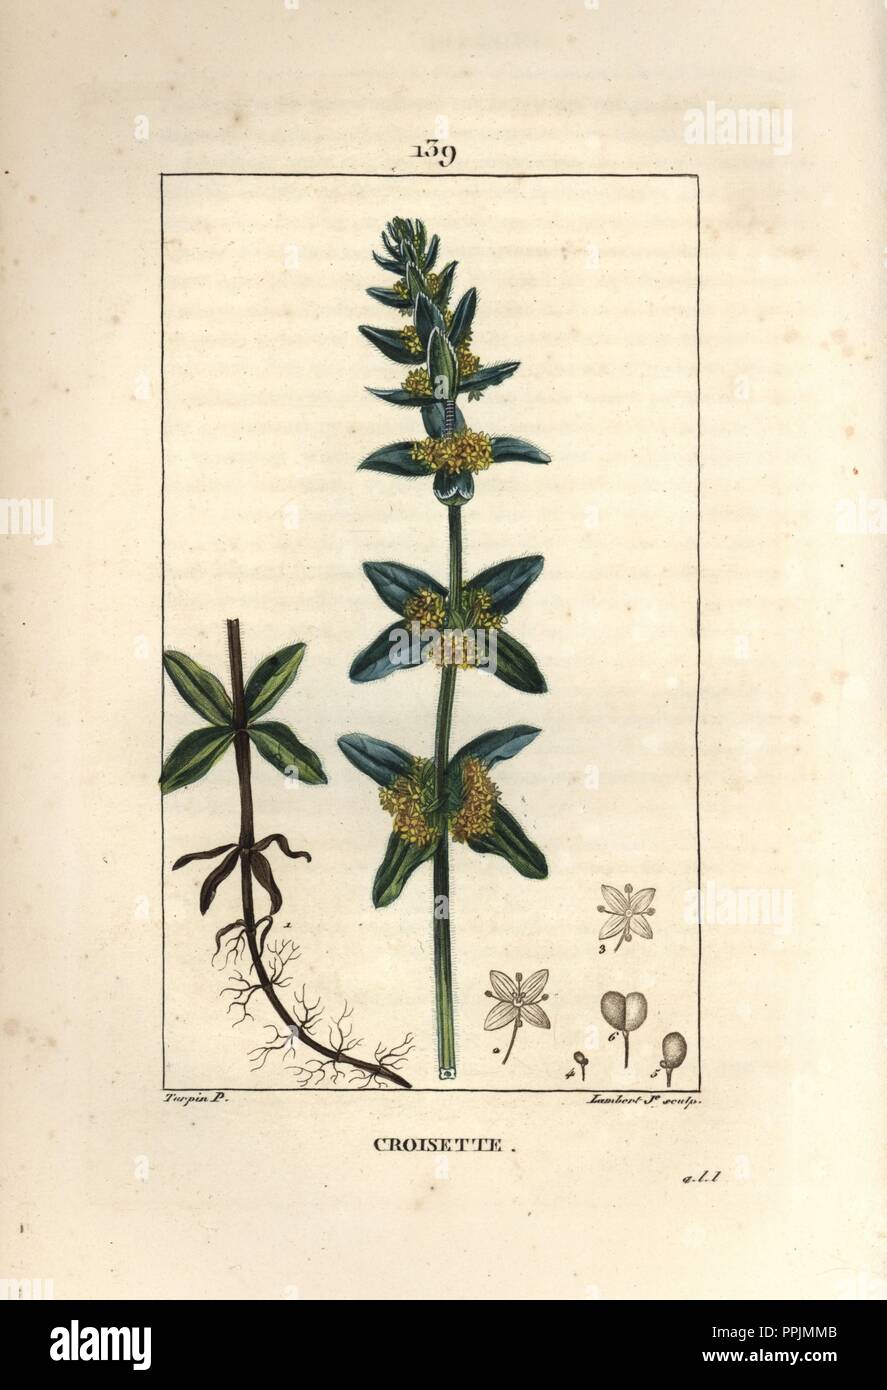 Crosswort, Cruciata laevipes Opiz, showing flower, leaf and roots. Handcoloured stipple copperplate engraving by Lambert Junior from a drawing by Pierre Jean-Francois Turpin from Chaumeton, Poiret et Chamberet's 'La Flore Medicale,' Paris, Panckoucke, 1830. Turpin (17751840) was one of the three giants of French botanical art of the era alongside Pierre Joseph Redoute and Pancrace Bessa. Stock Photo